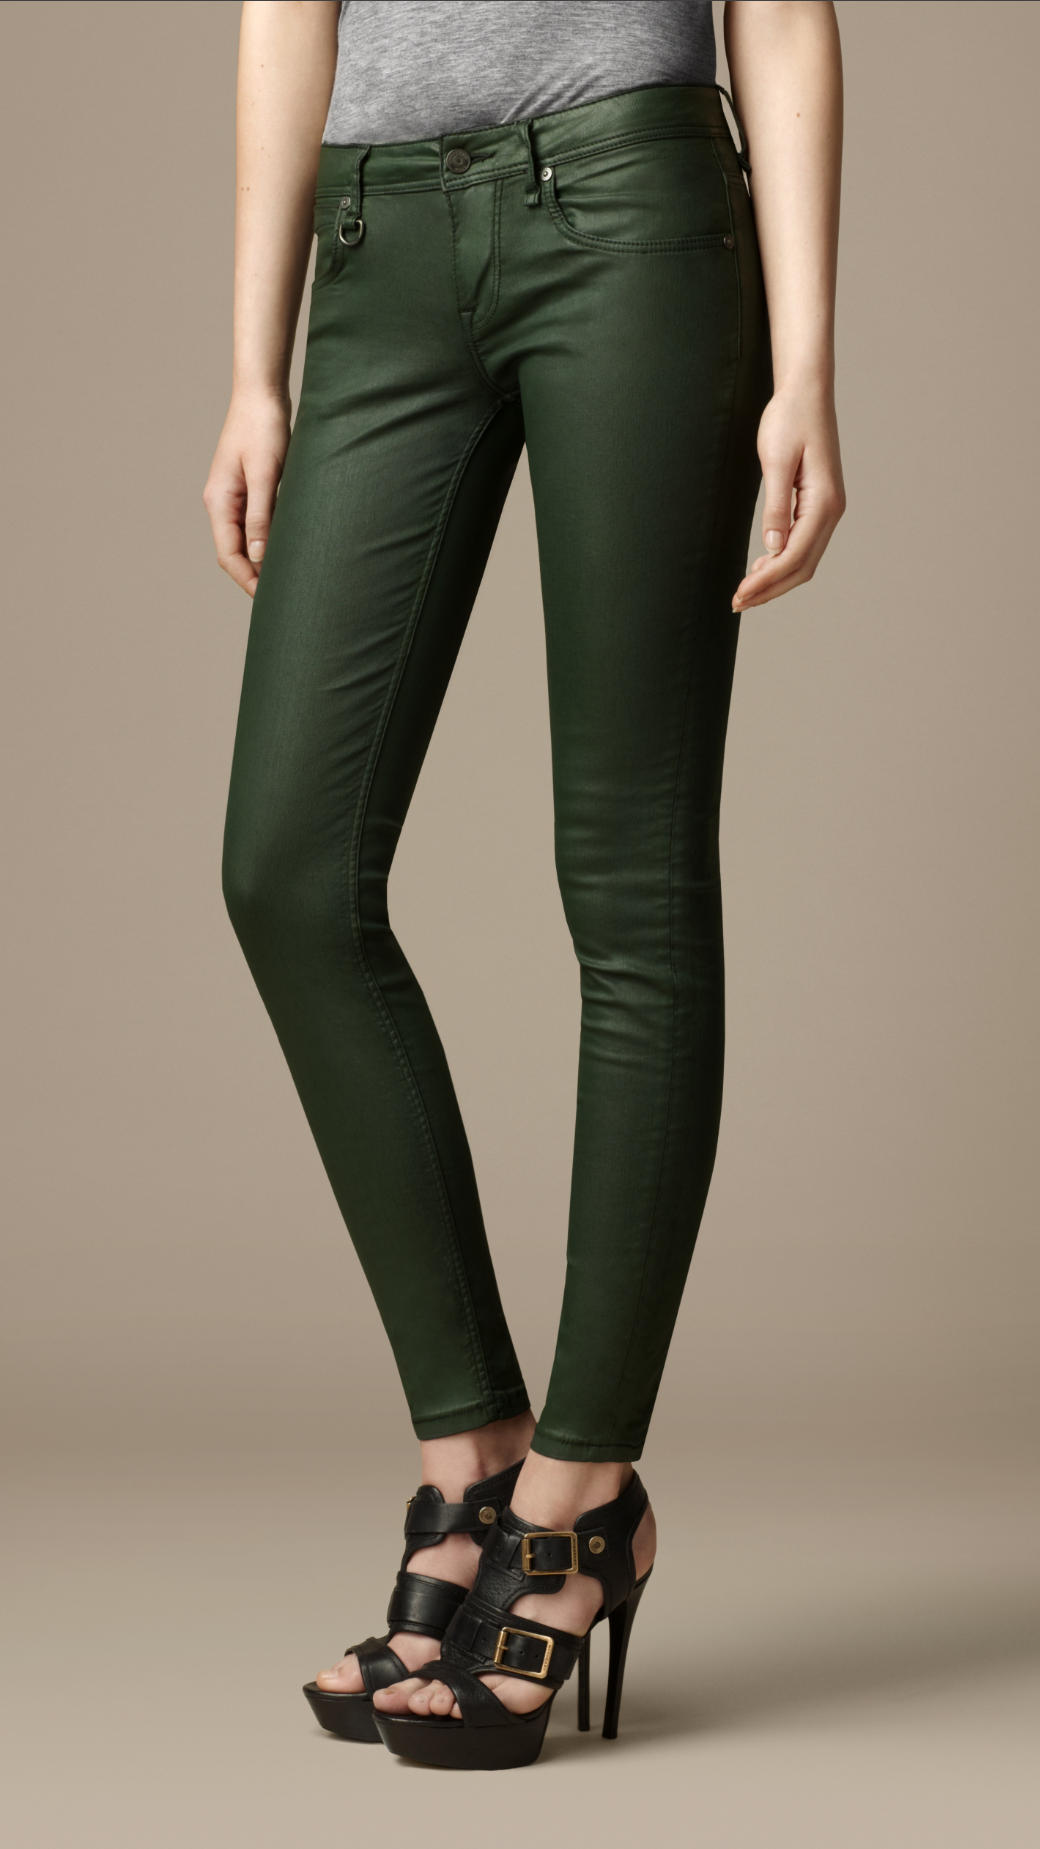 Burberry Westbourne Coated Skinny Jeans in Dark Racing Green (Green) - Lyst